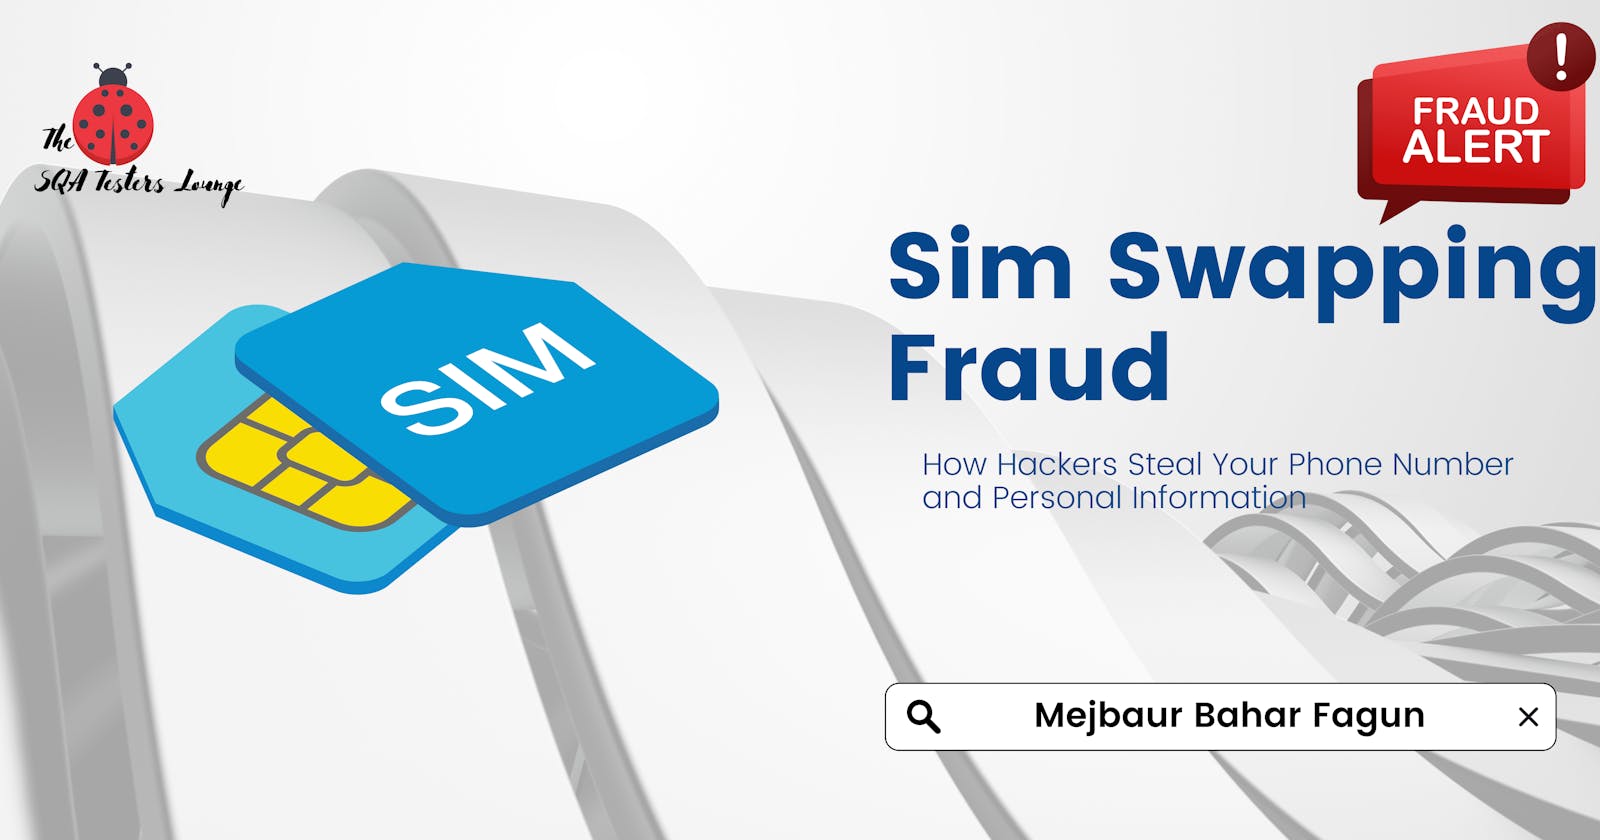 Sim Swapping Fraud: How Hackers Steal Your Phone Number and Personal Information